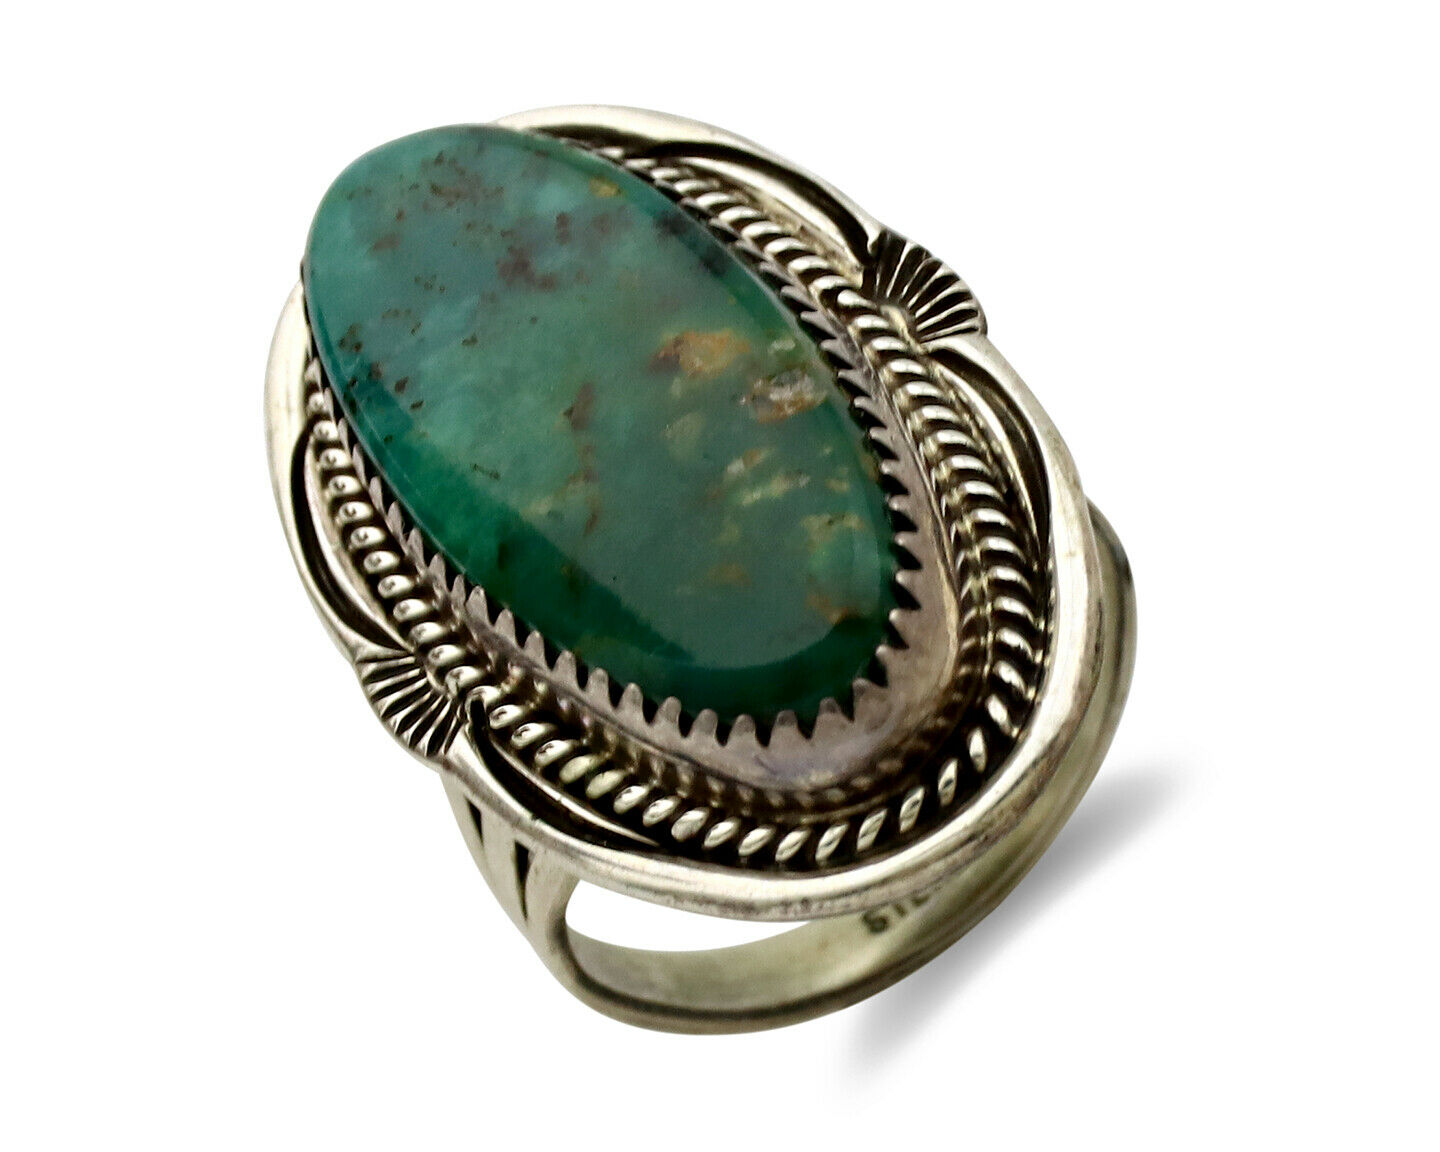 Navajo Ring .925 Silver Kingman Turquoise Artist Signed M Begay C.1980's